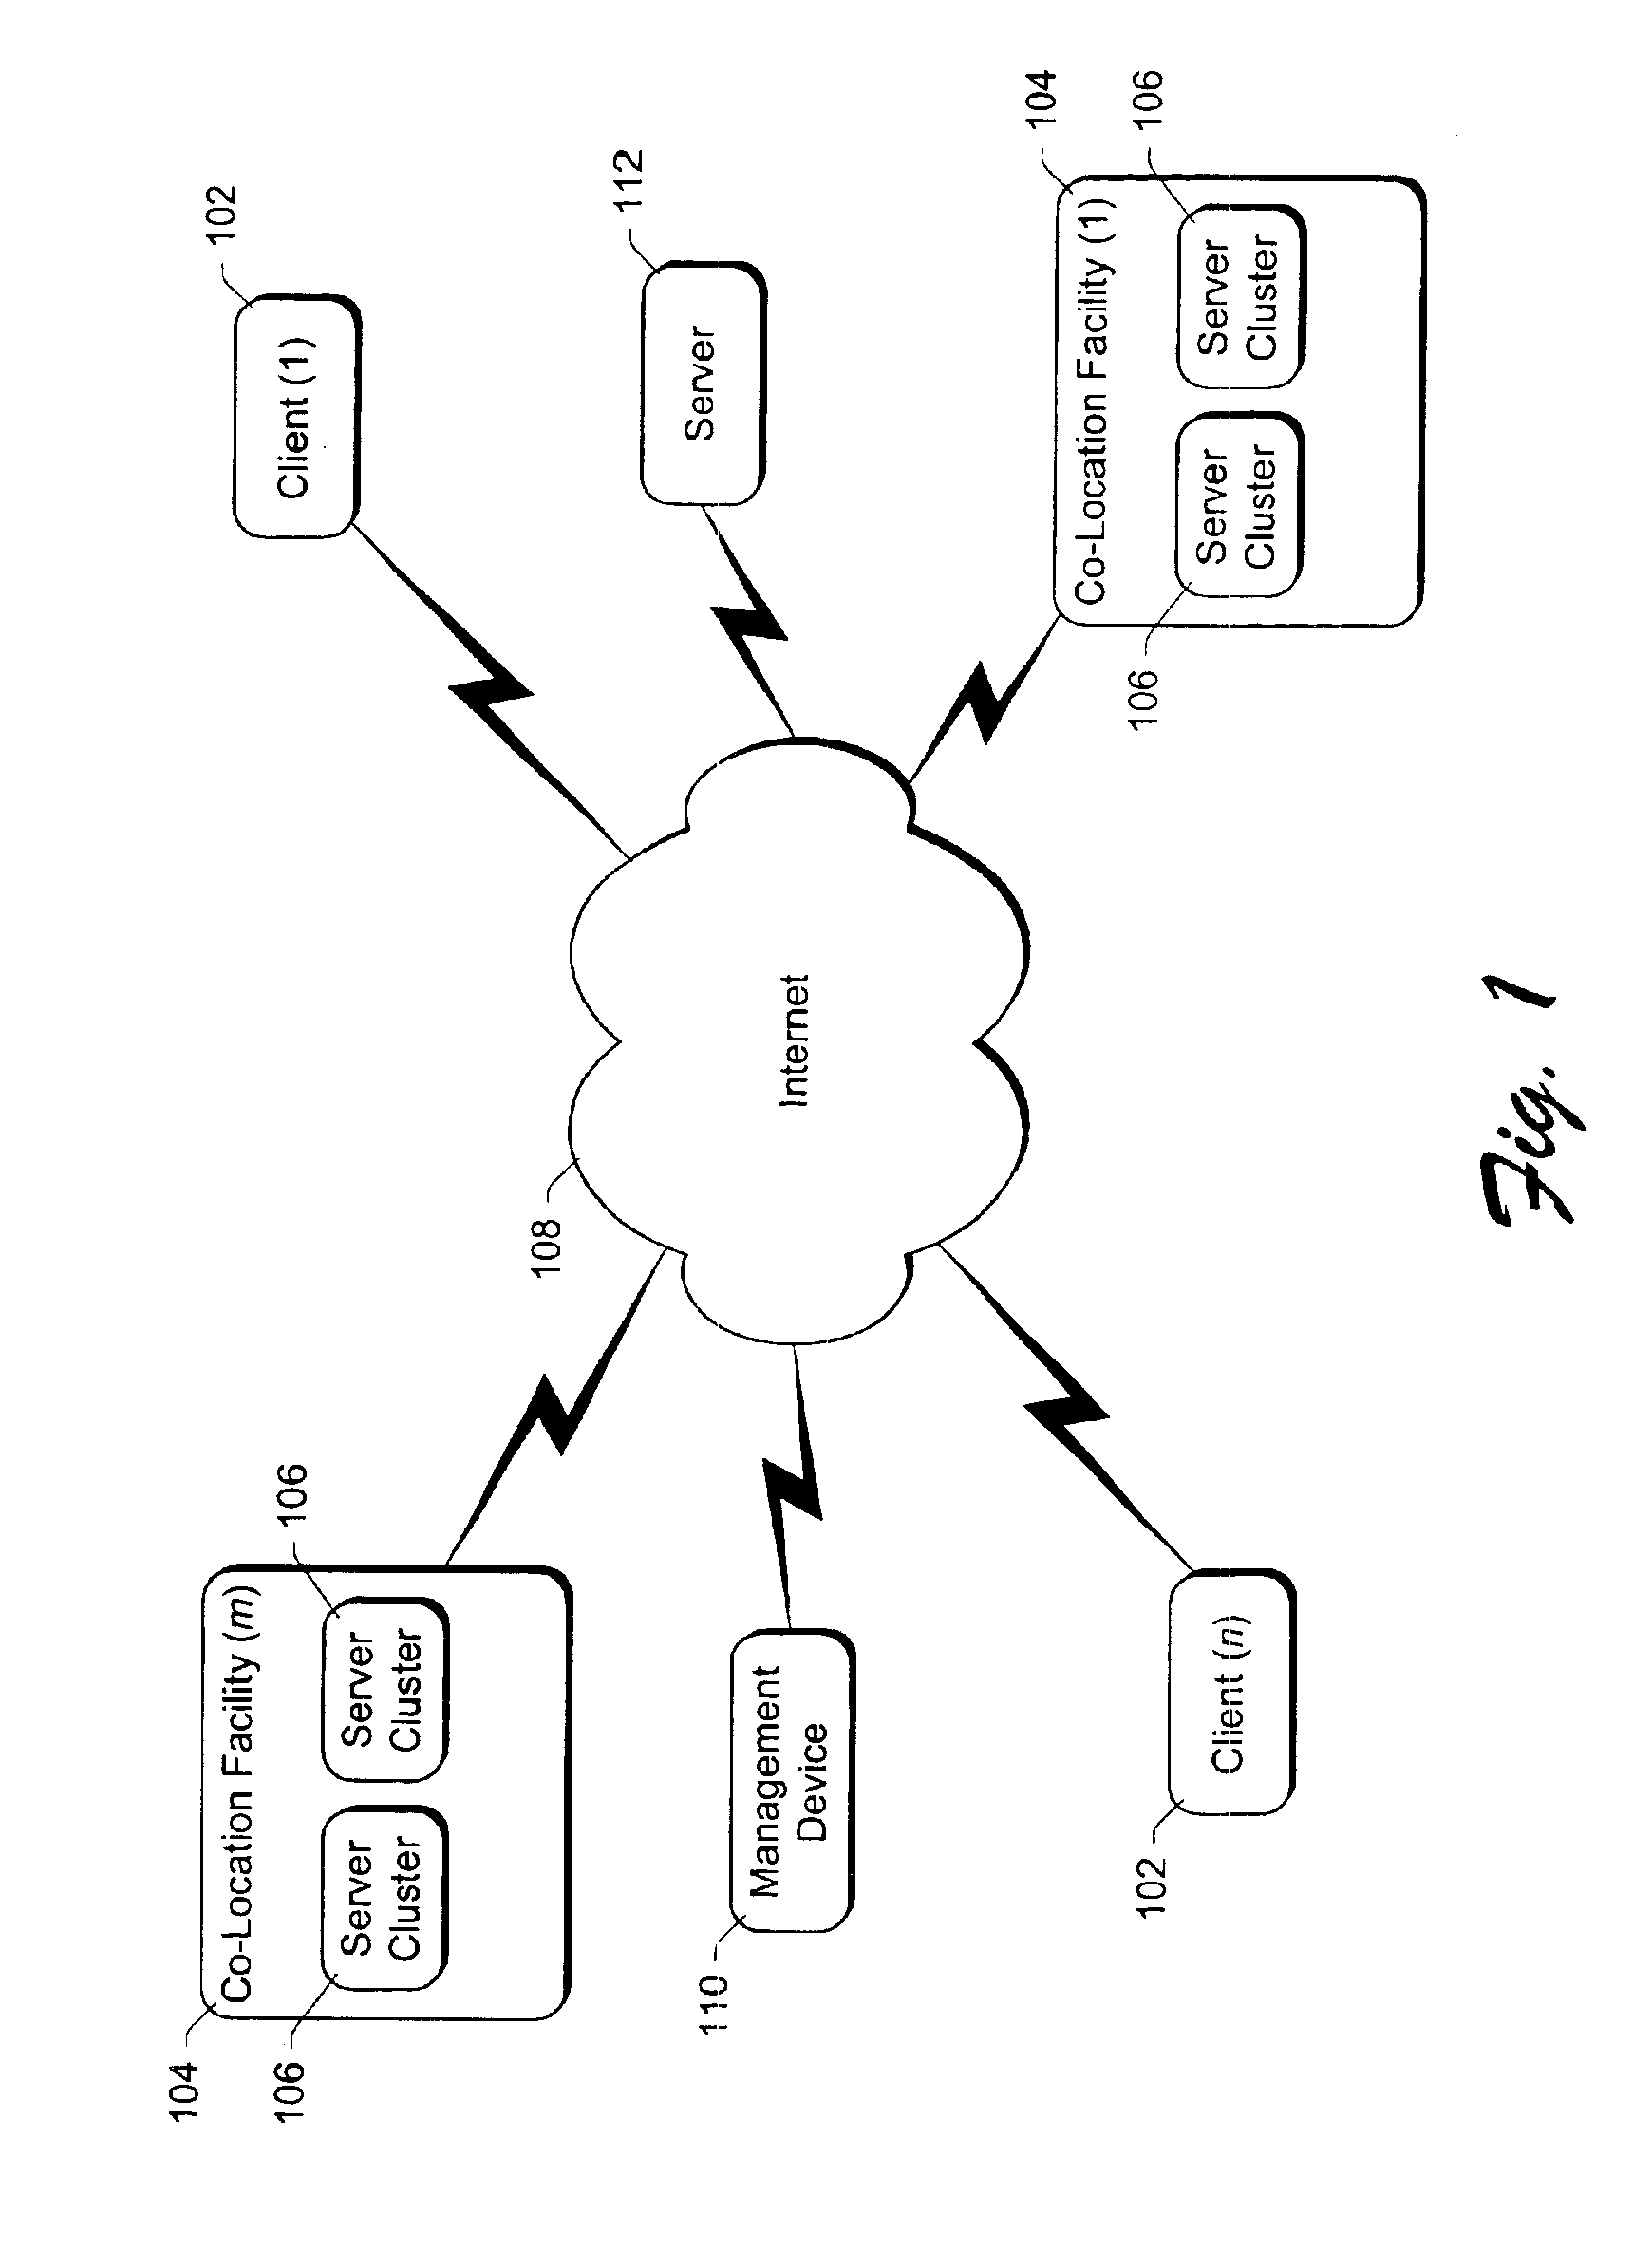 System and method for restricting data transfers and managing software components of distributed computers